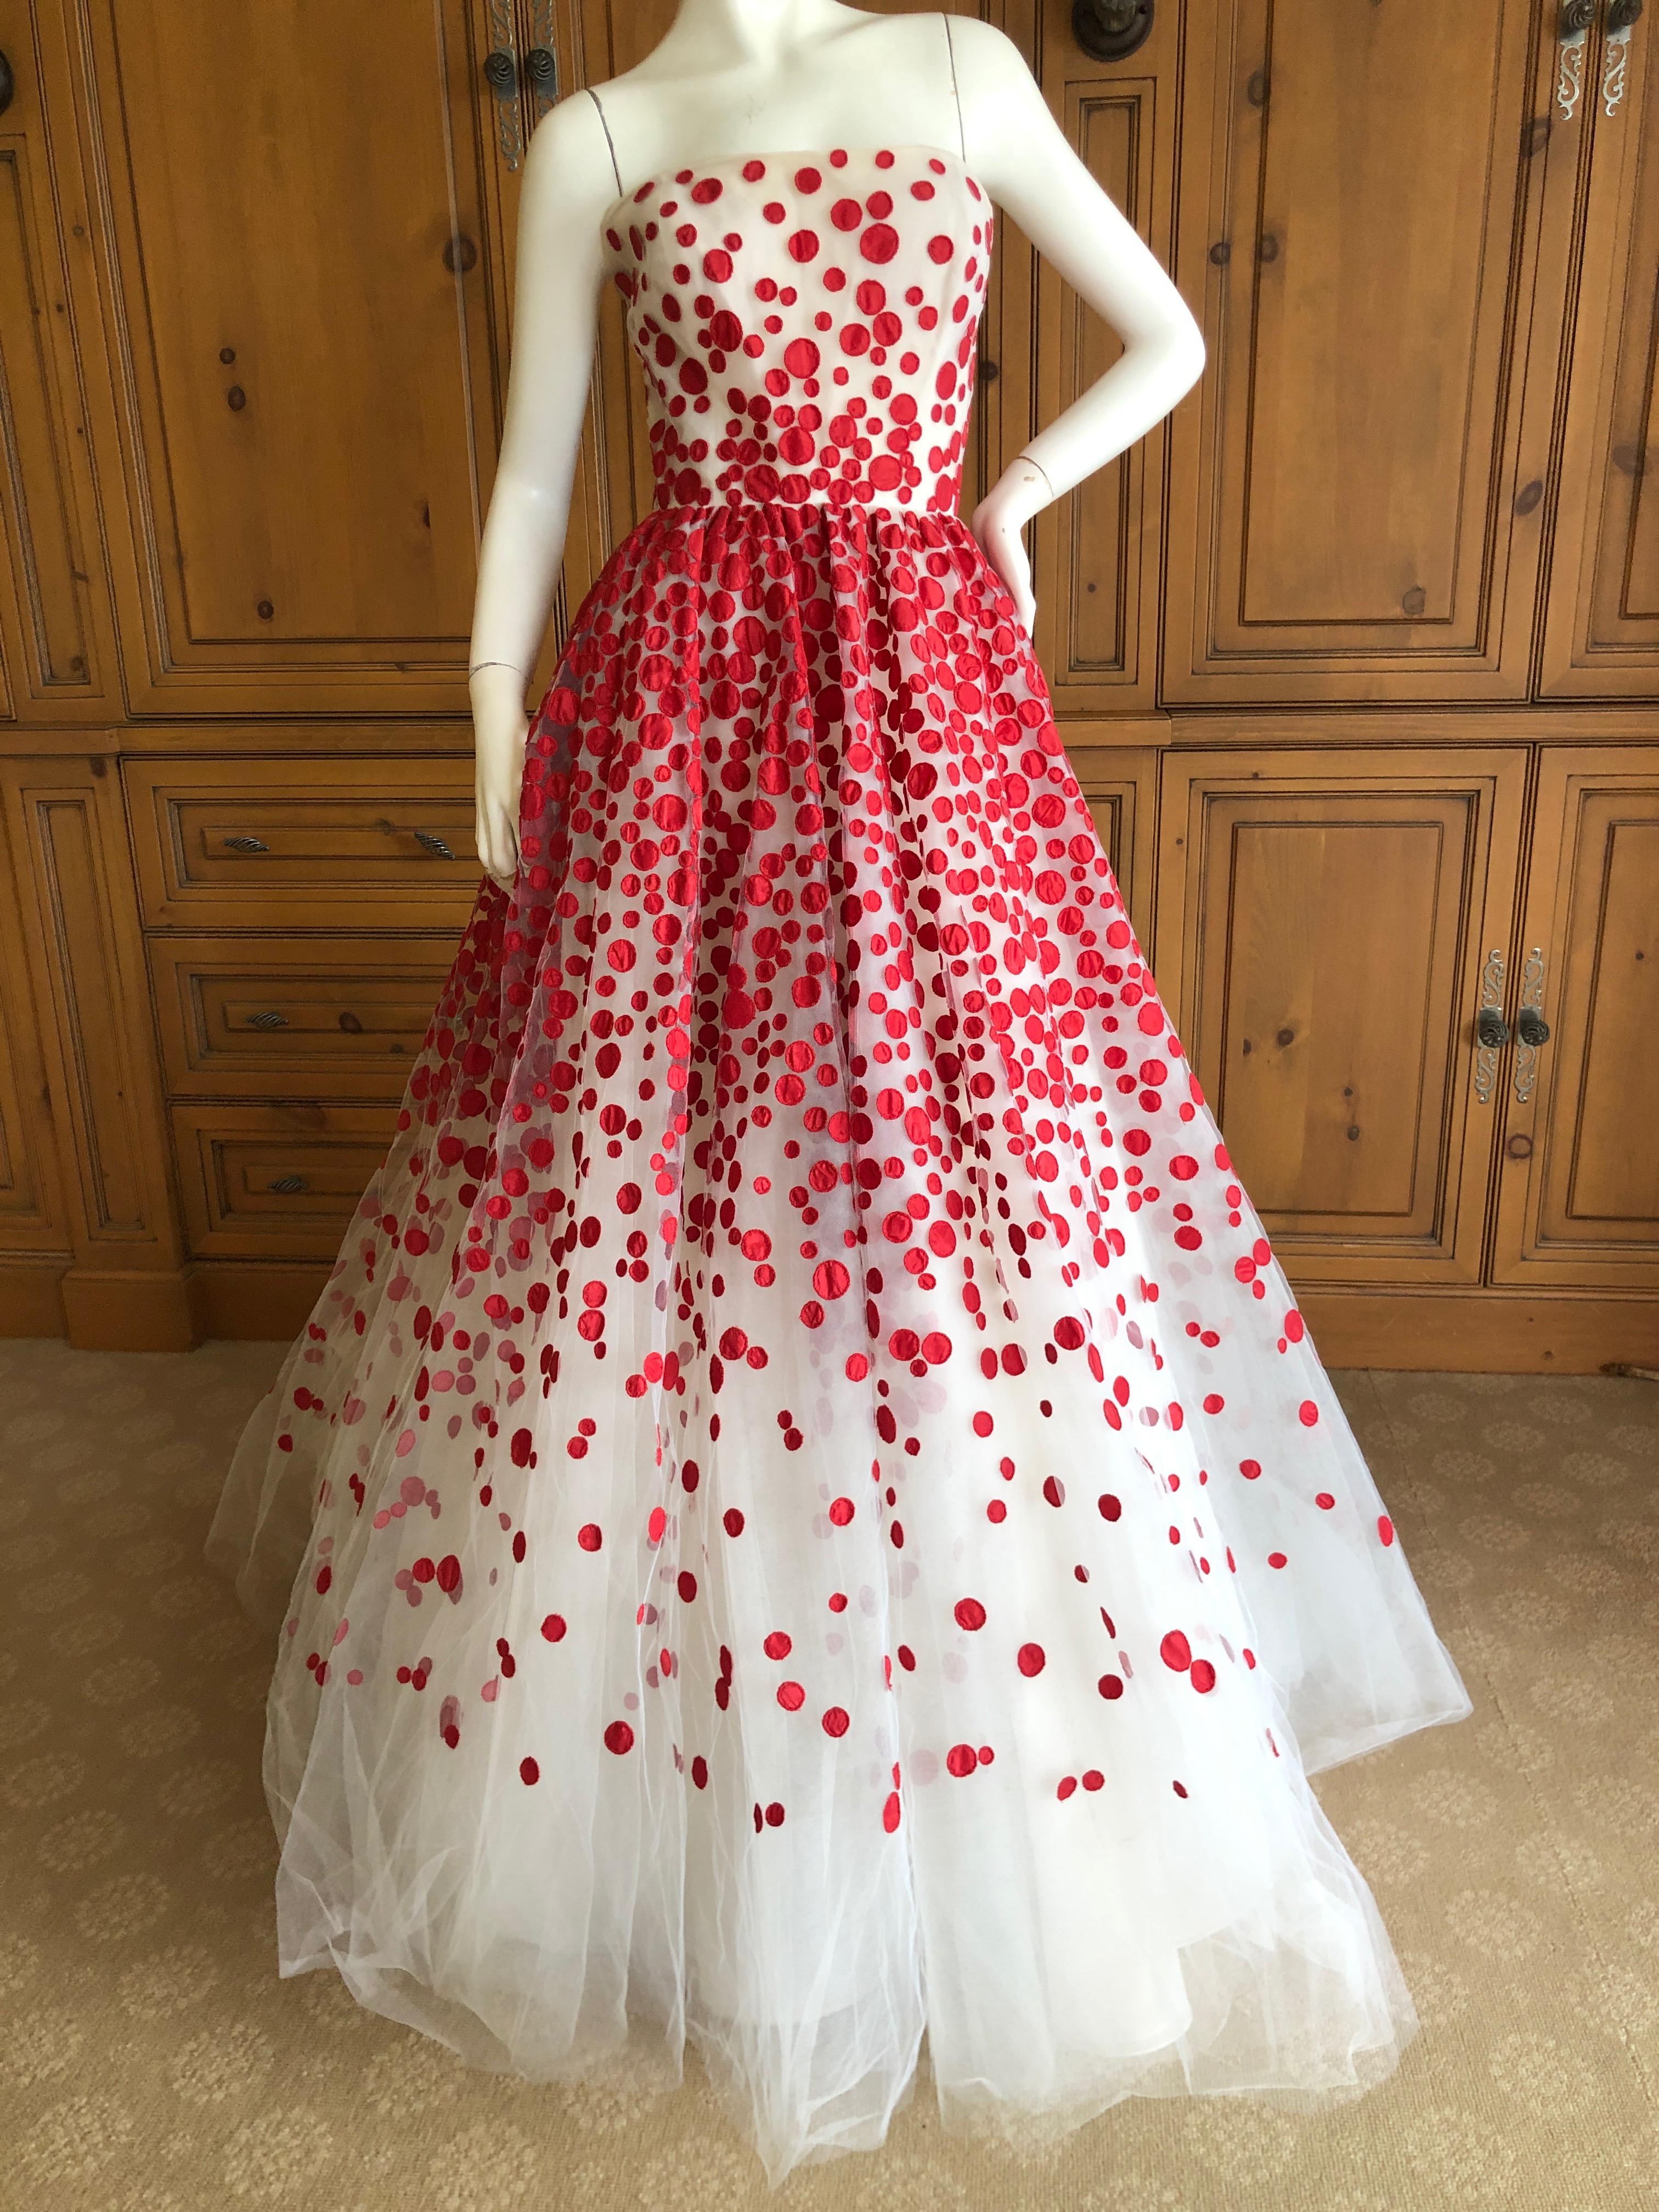 Oscar de la Renta Romantic Red Dot Strapless Tulle Ball Gown 
There is an inner bustier.  Simply Stunning. 
Please use the zoom feature to see al the remarkable details.
 Four layers of skirts 
Size 12
 Bust 36